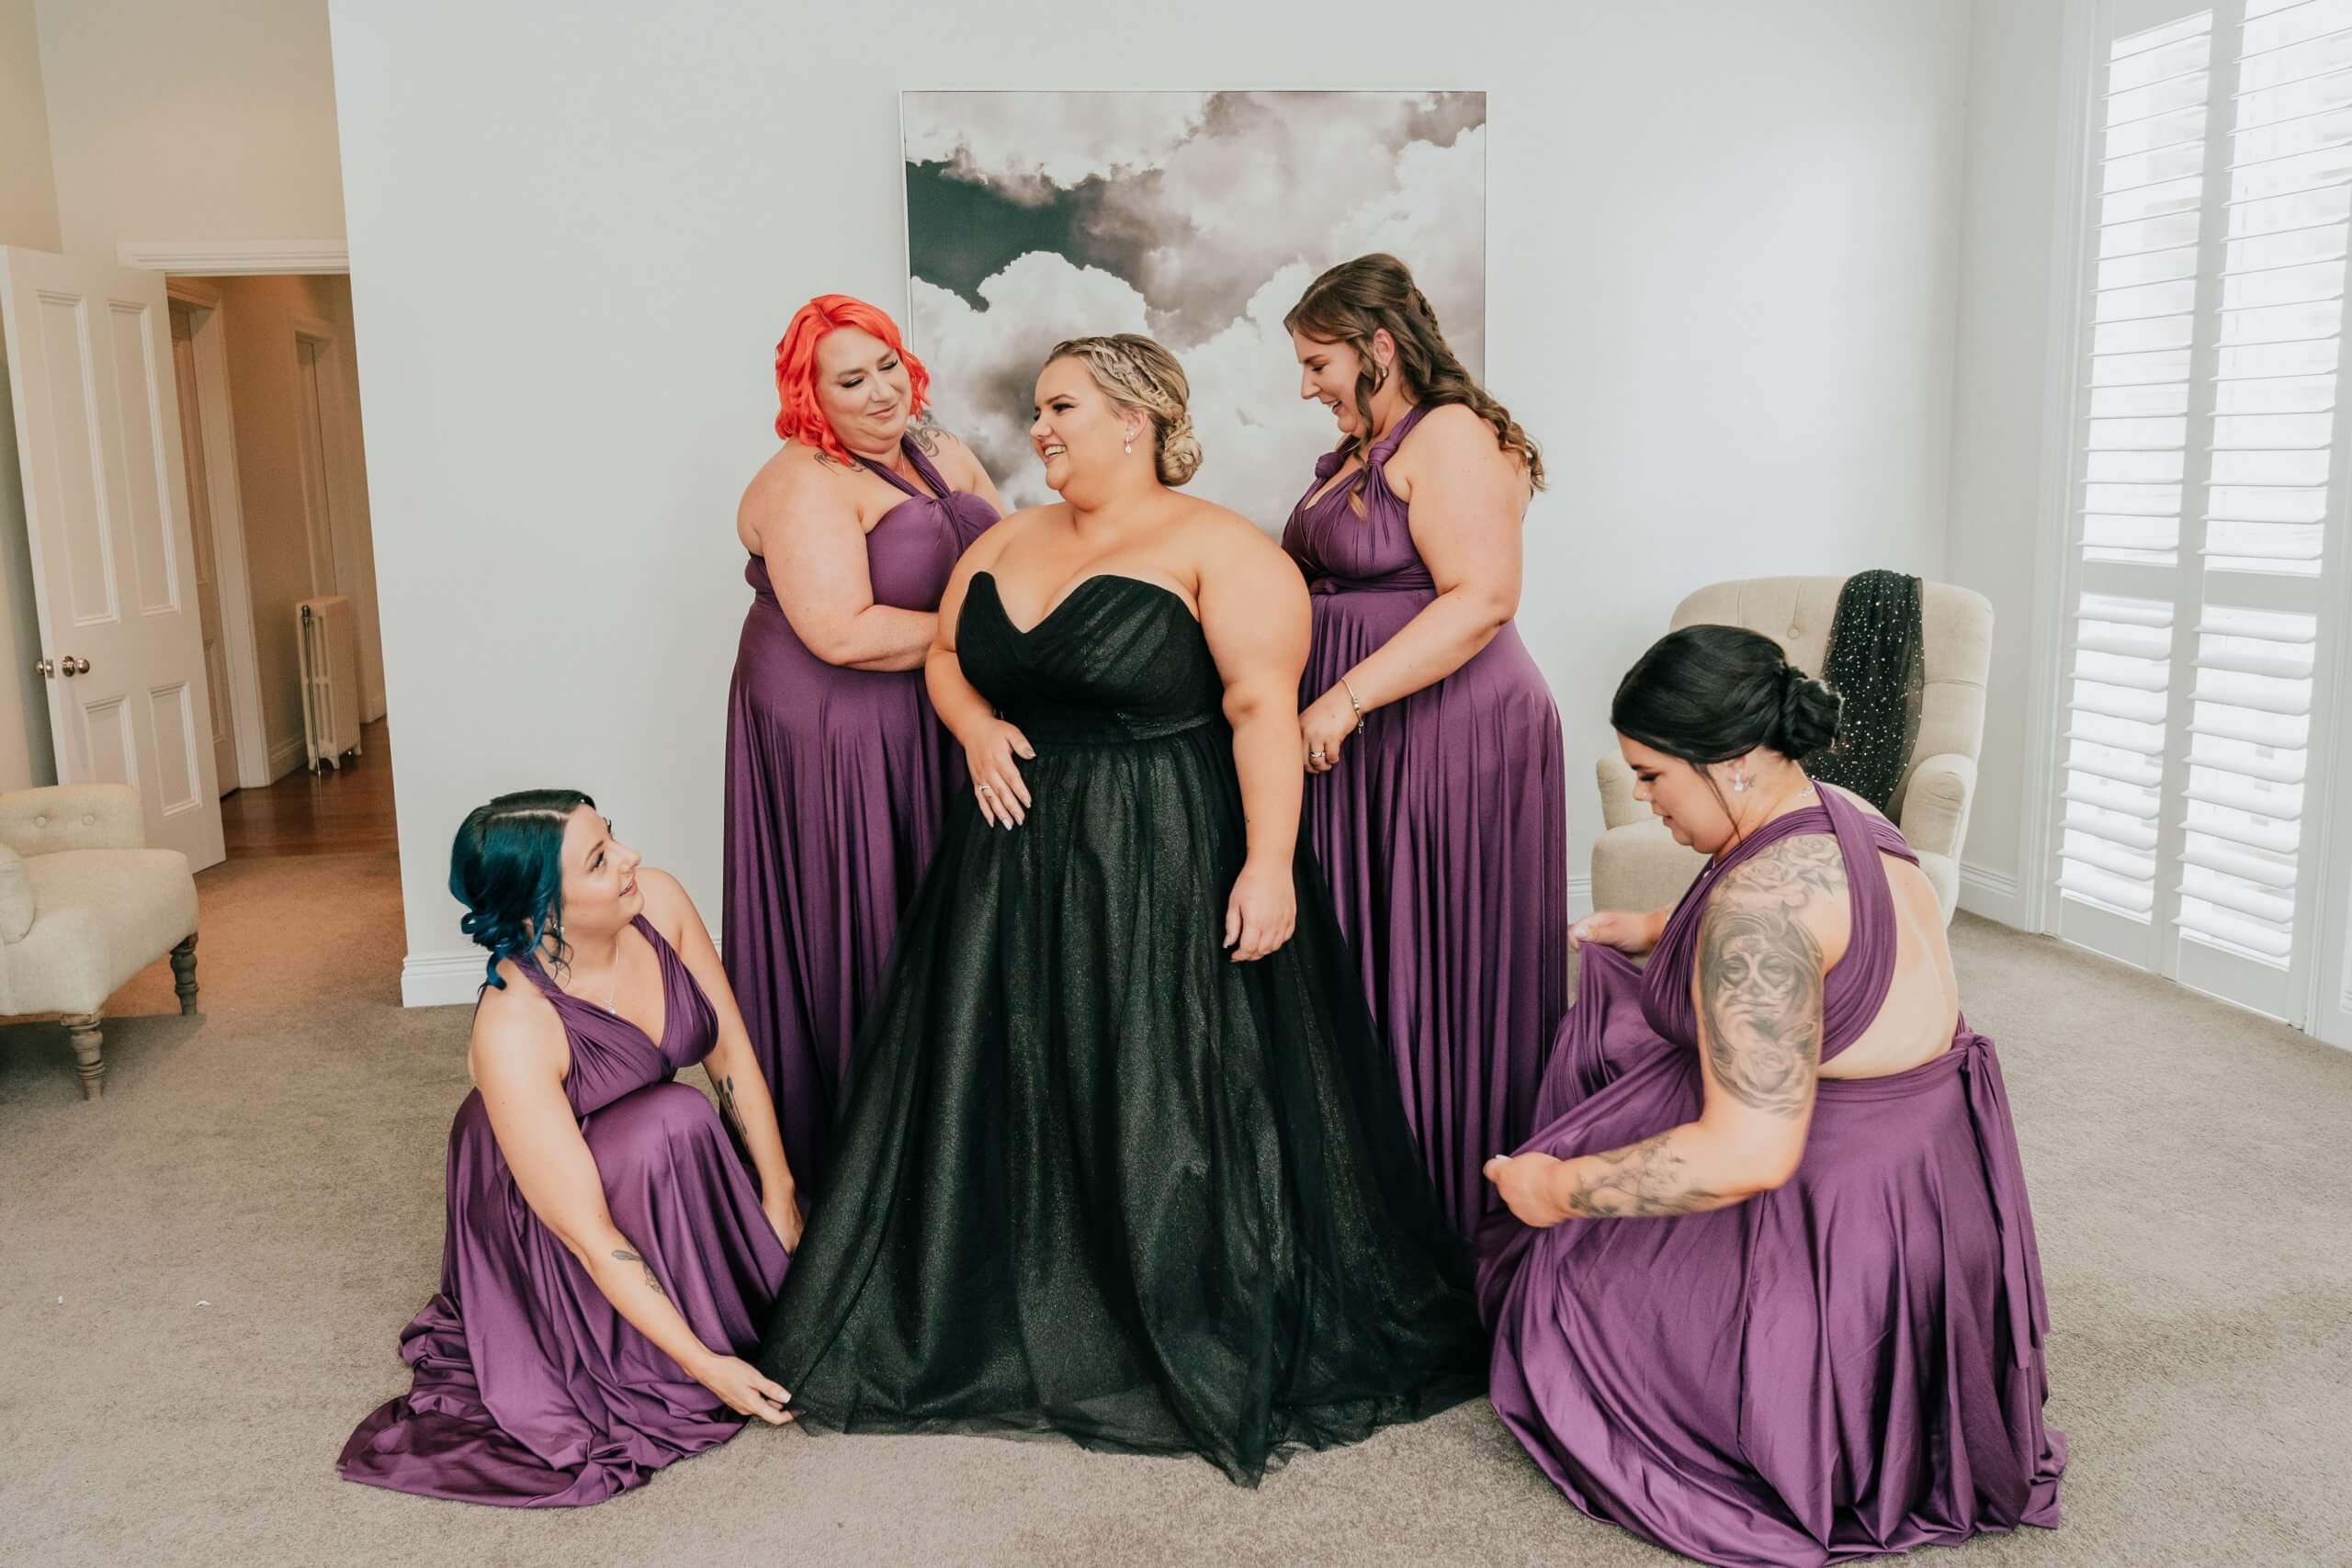 Bride in her unconventional black wedding dress, surrounded by her four bridesmaids who are wearing purple dresses.